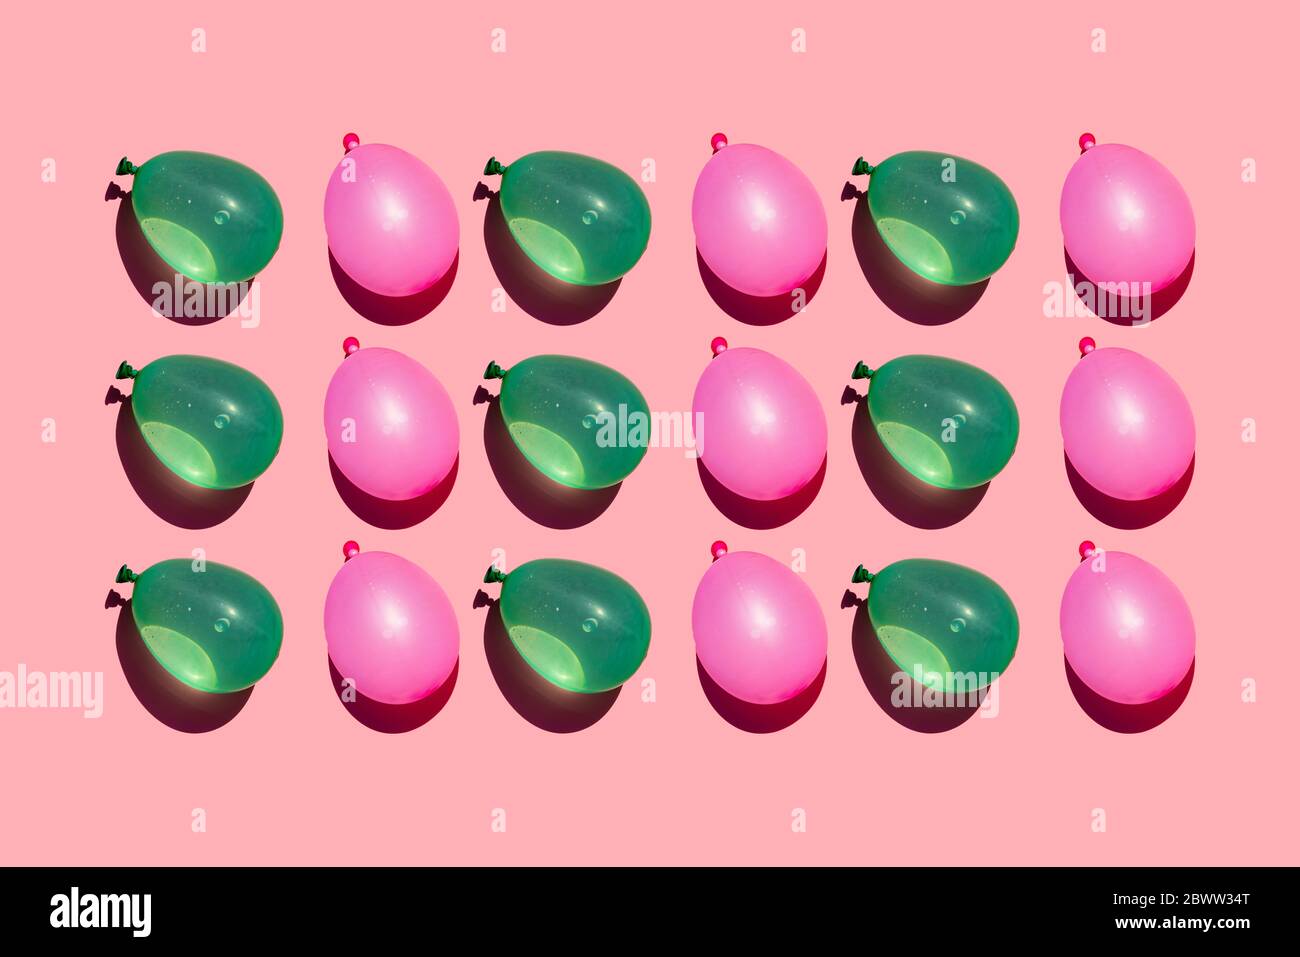 Studio shot of rows of pink and green water balloons Stock Photo